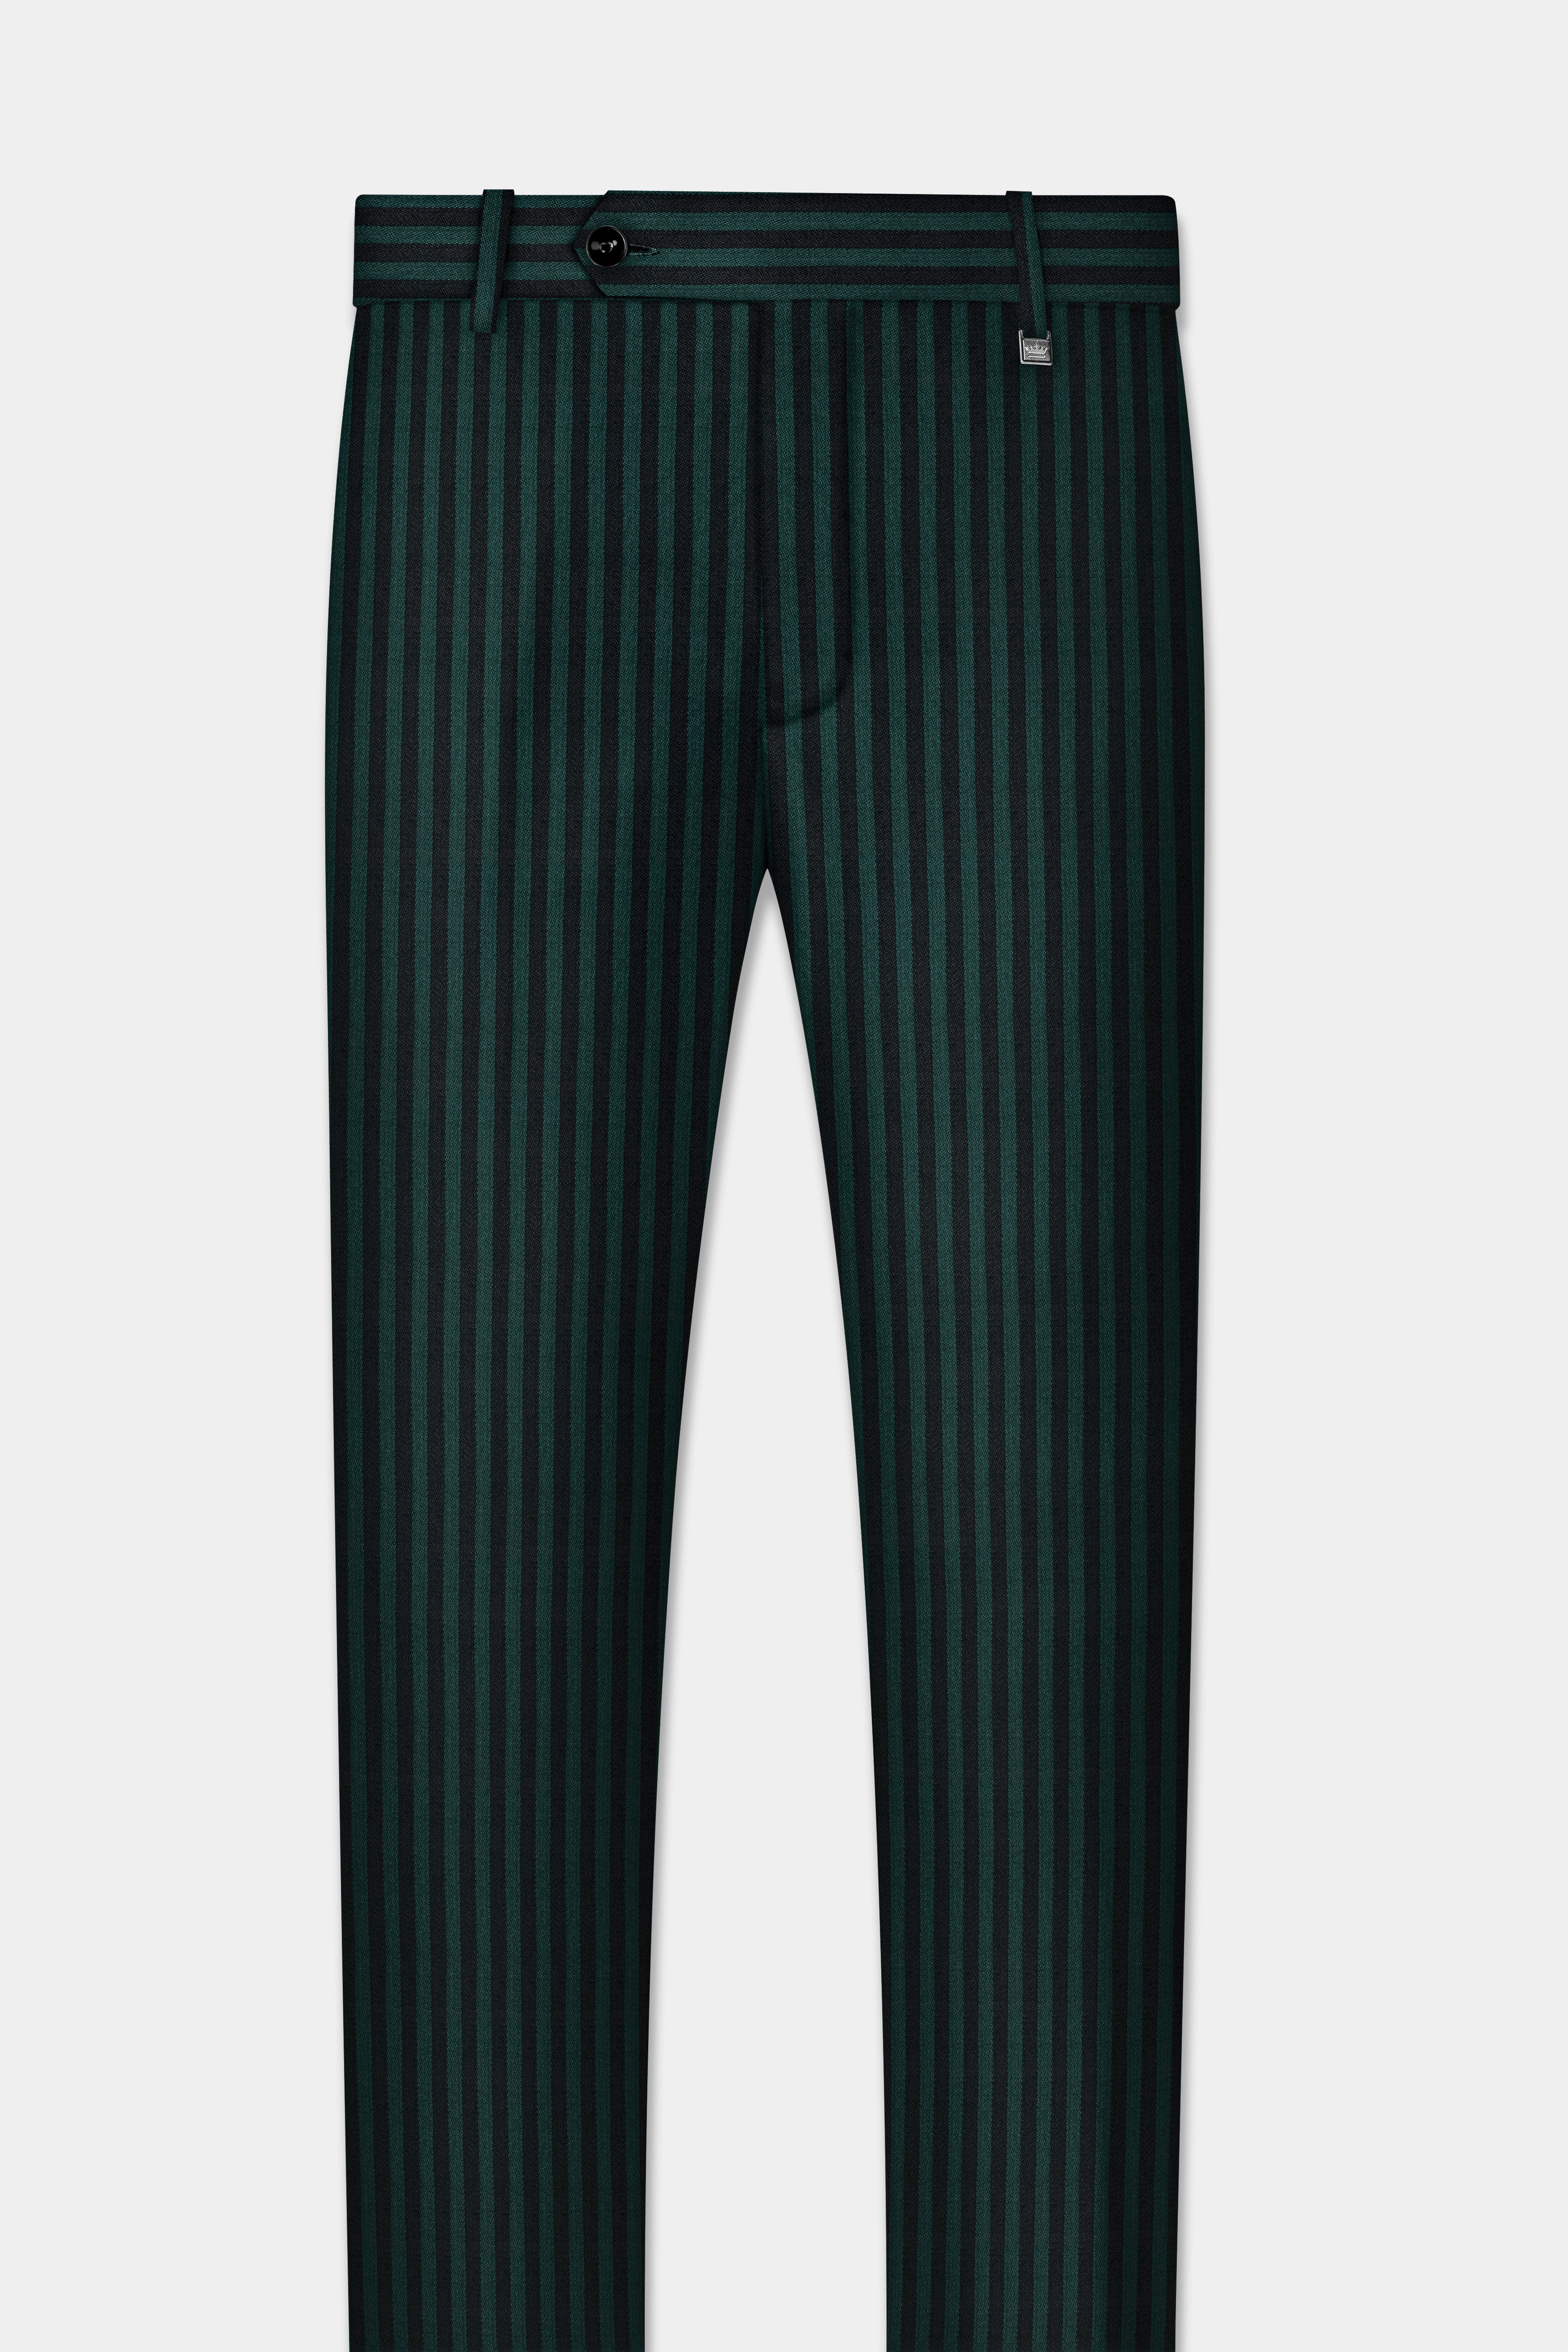 Celtic Green with Black Striped Wool Blend Pant